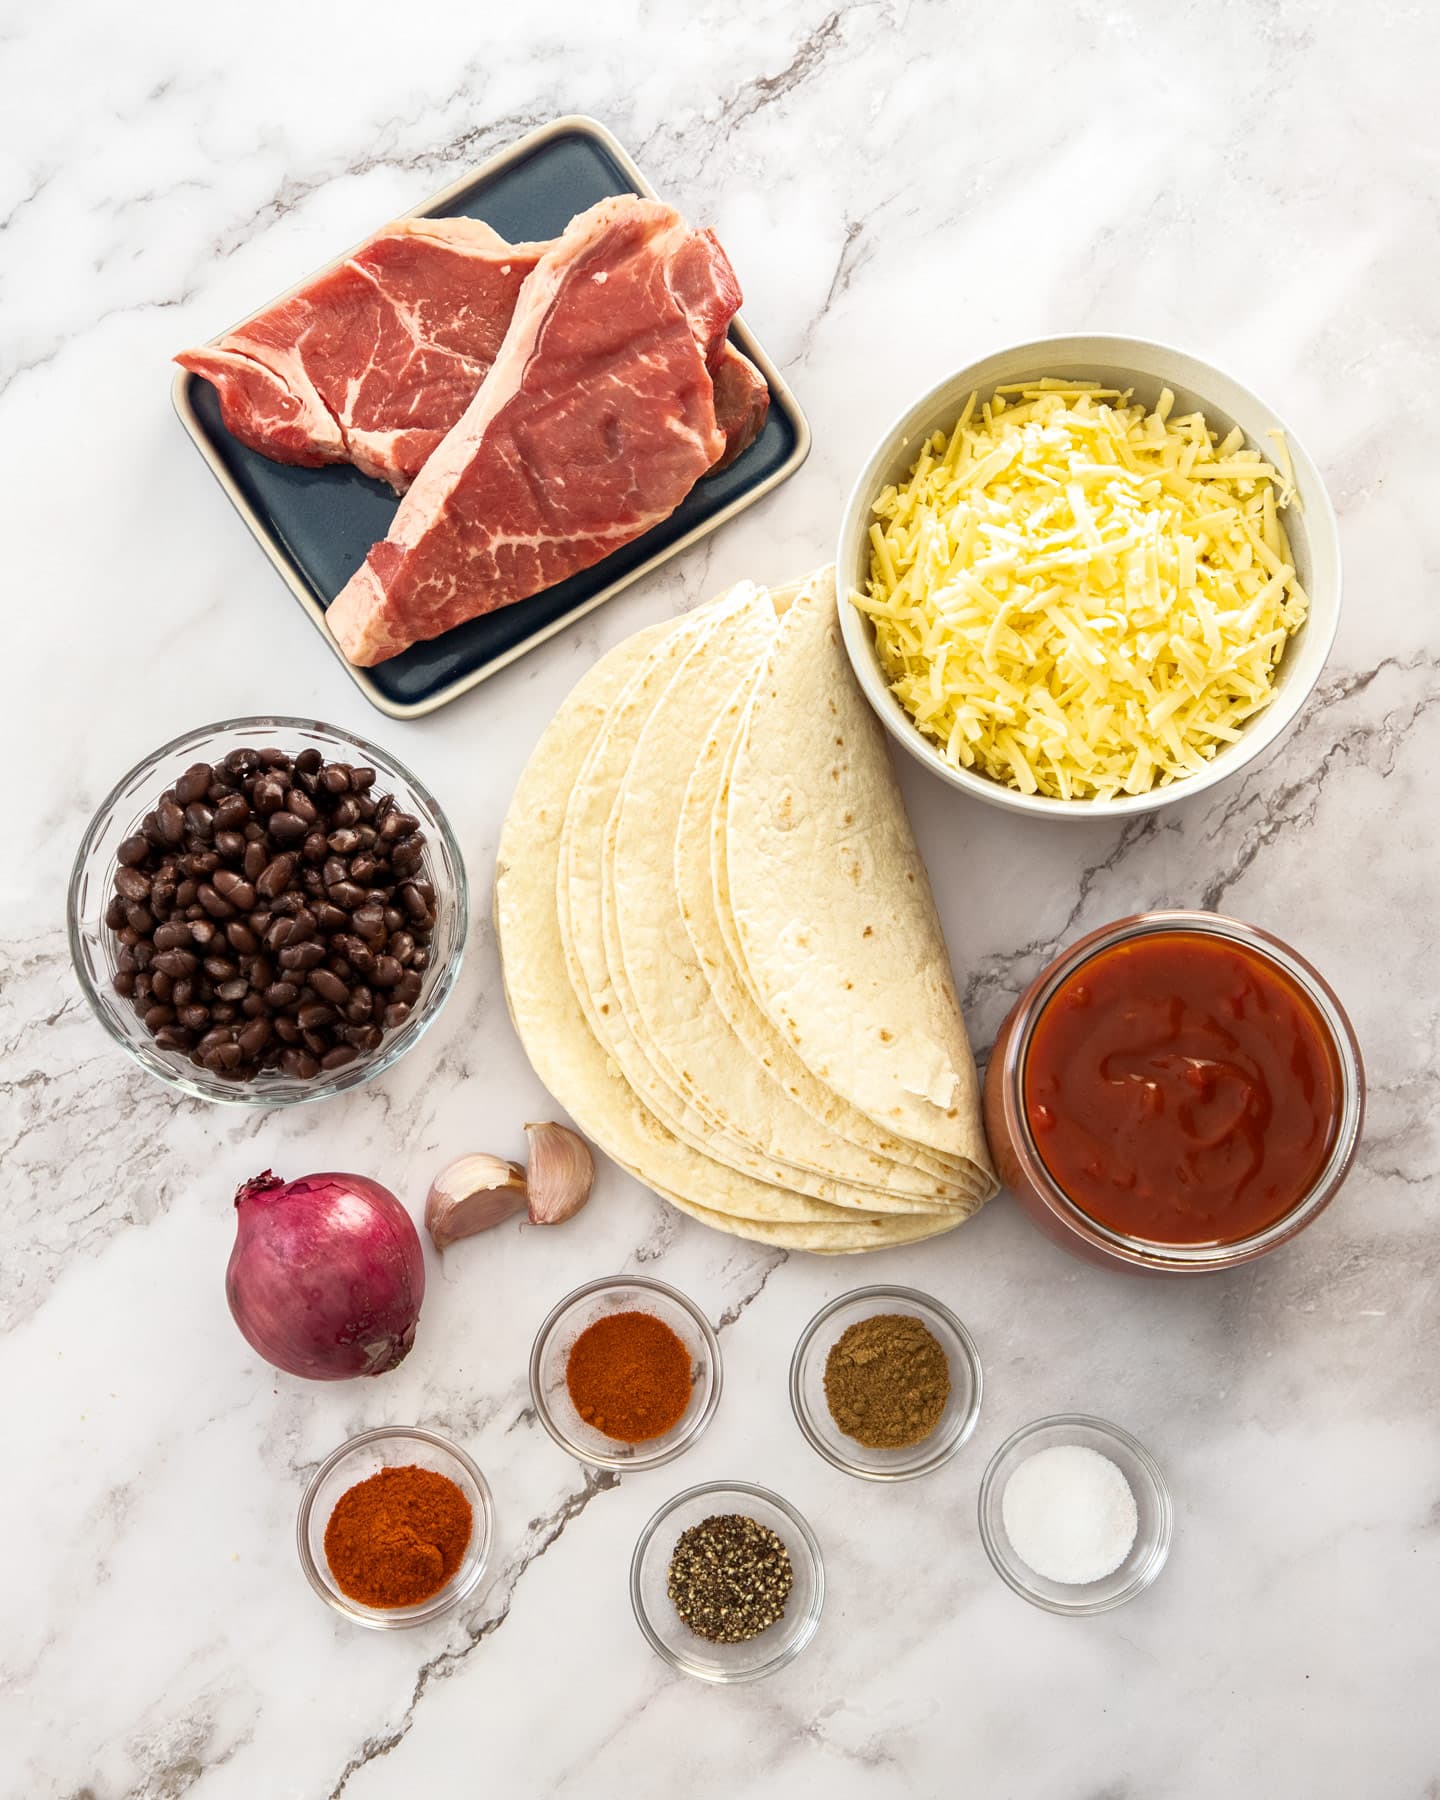 Ingredients for steak enchiladas on a marble surface.